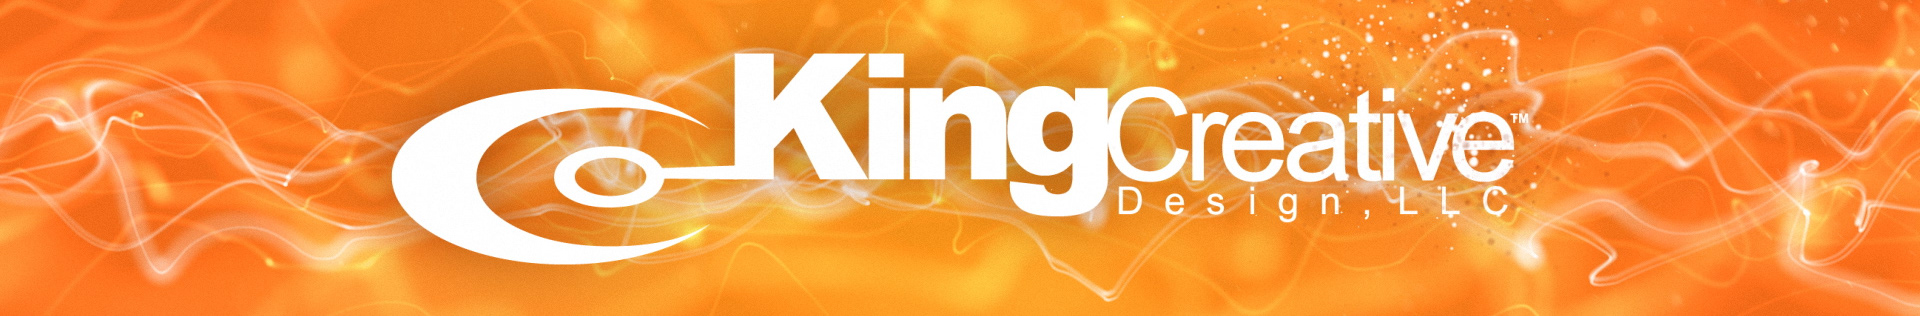 Colin King's profile banner